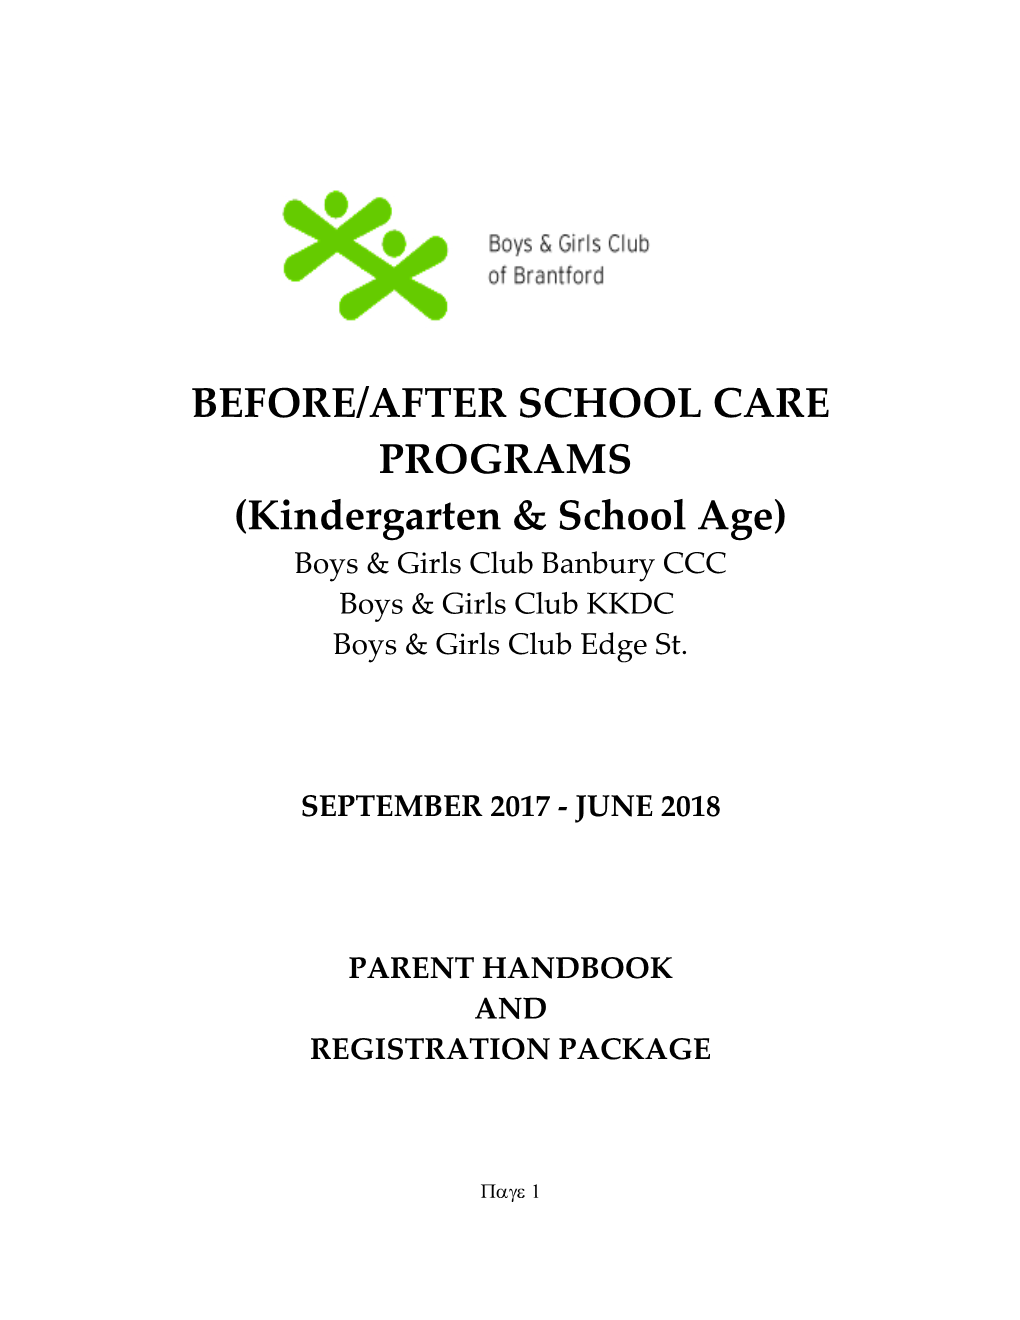 Before/After School Care Programs